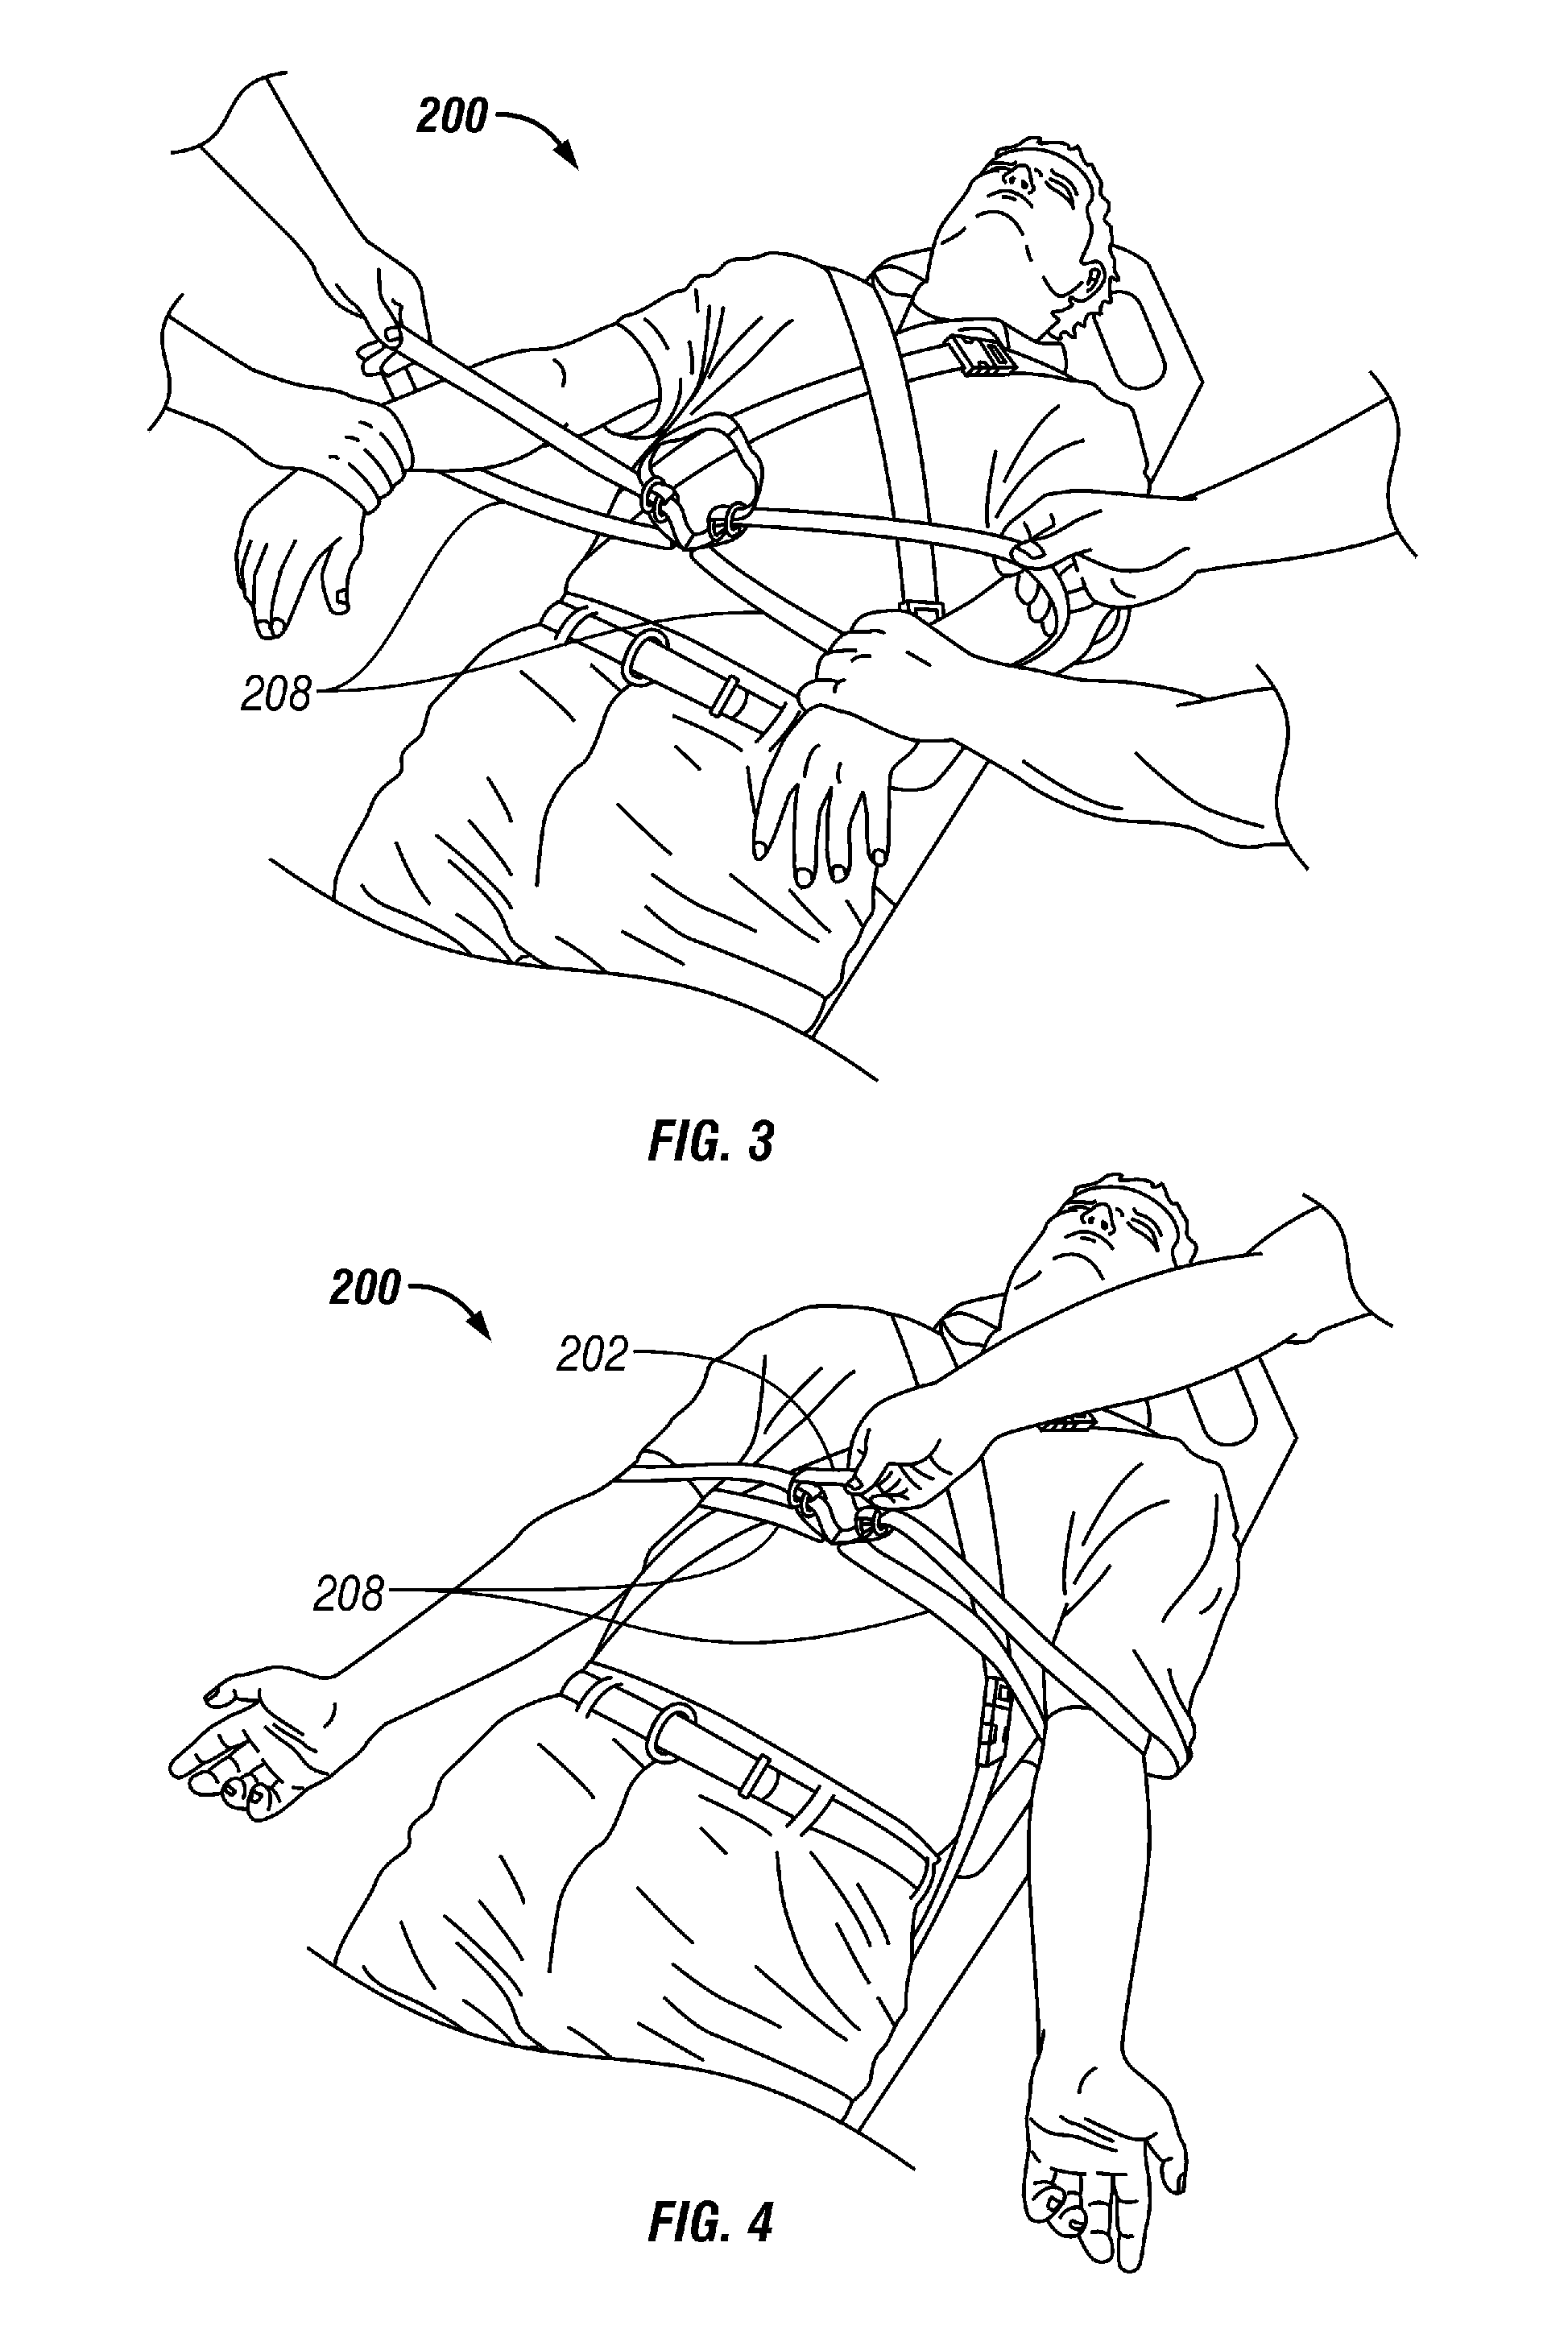 Straps for restraining a patient's arms